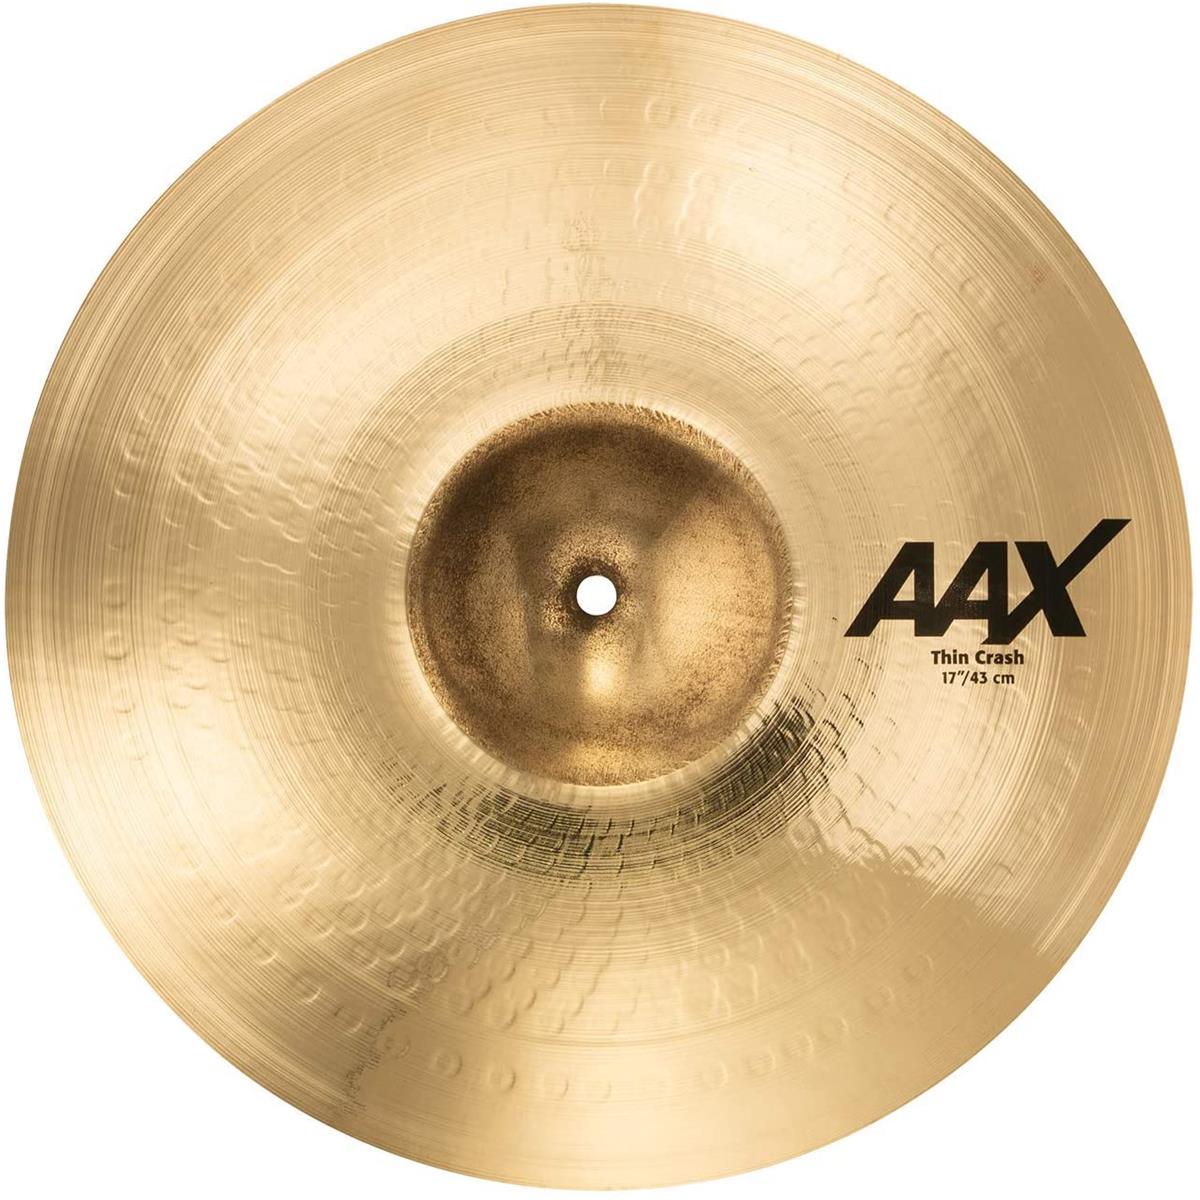 Sabian 17" AAX Thin Crash Cymbal, Brilliant Finish The 17" AAX Thin Crash from SABIAN introduces a whole new palette of sound to the AAX line. A small raw bell delivers faster response. A whole new style of AAX hammering - much more visible on the surface of the cymbal due to the larger, rounder peen - makes for a thinner, more complex and slightly darker crash. At the same time, more highs are introduced into the sound, resulting in a wider band of frequency.For drummers, that means brighter highs and more complex lows. SABIAN has always pushed the boundaries of innovation, using the latest manufacturing technology to answer new trends in music and sound. AAX Thin Crashes are no exception, answering the call for thinner, faster, more complex crashes.